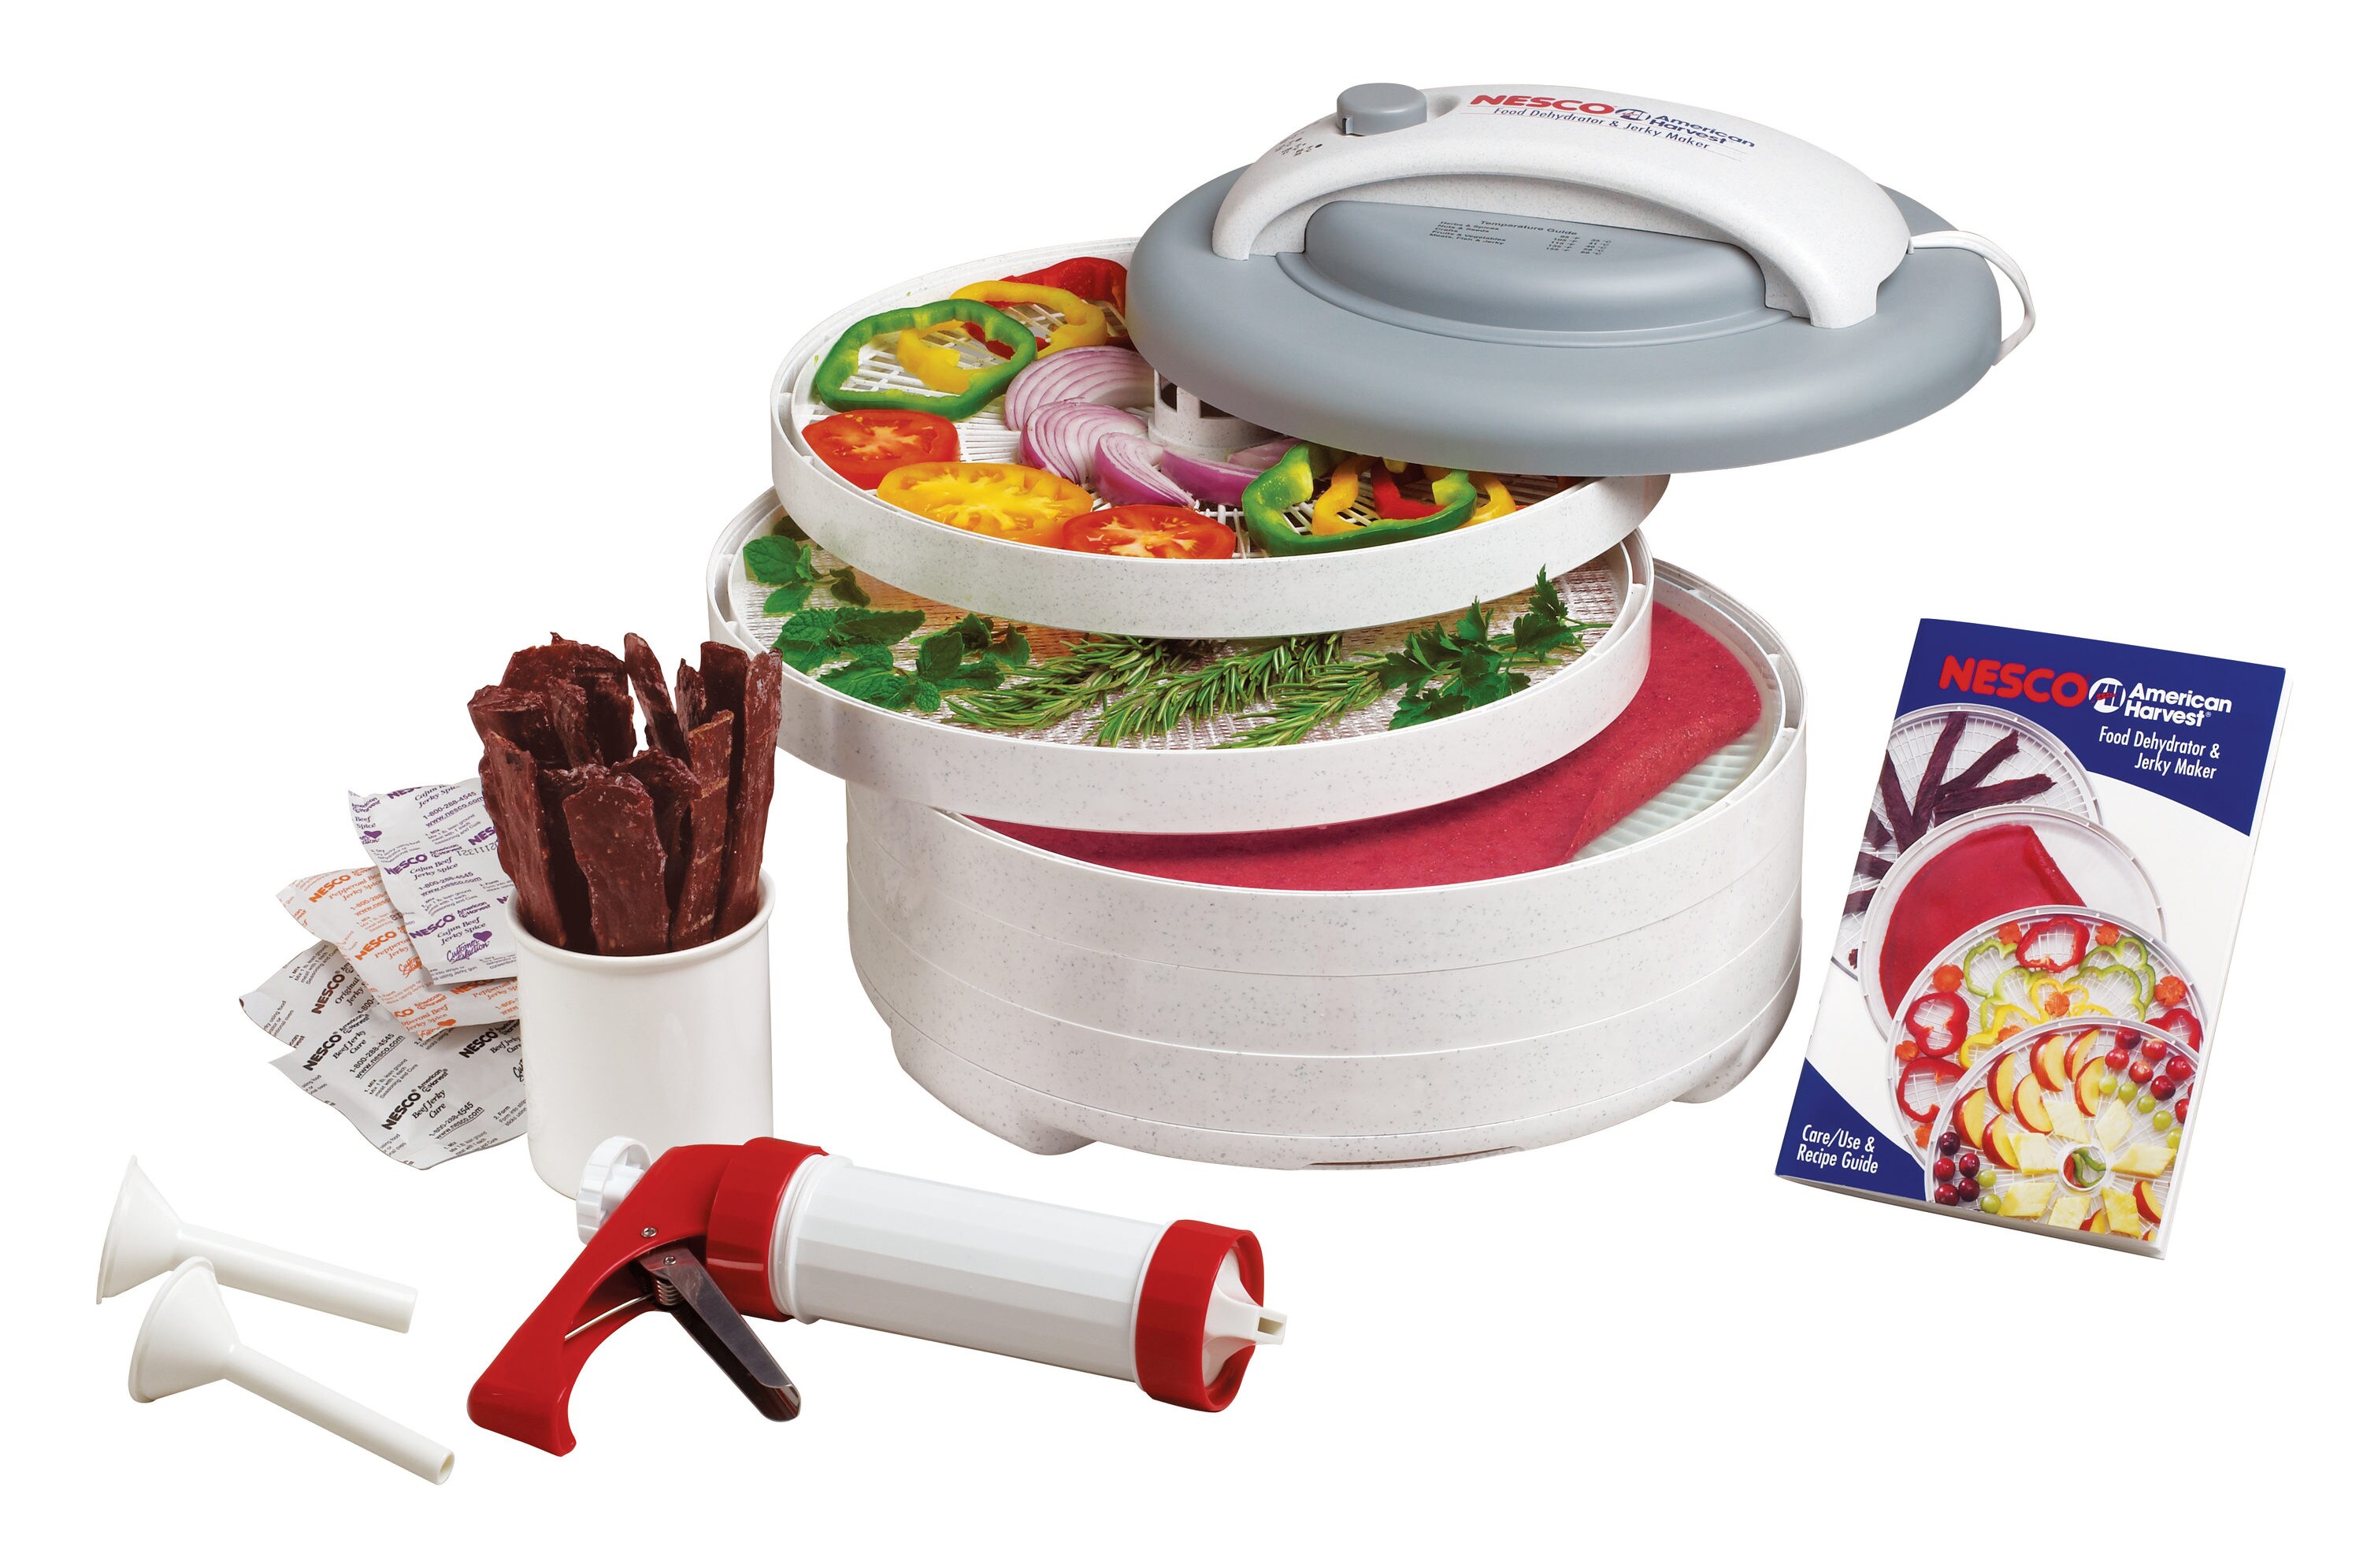 NESCO+FD-75A+Snackmaster+Pro+Food+Dehydrator-+Gray for sale online